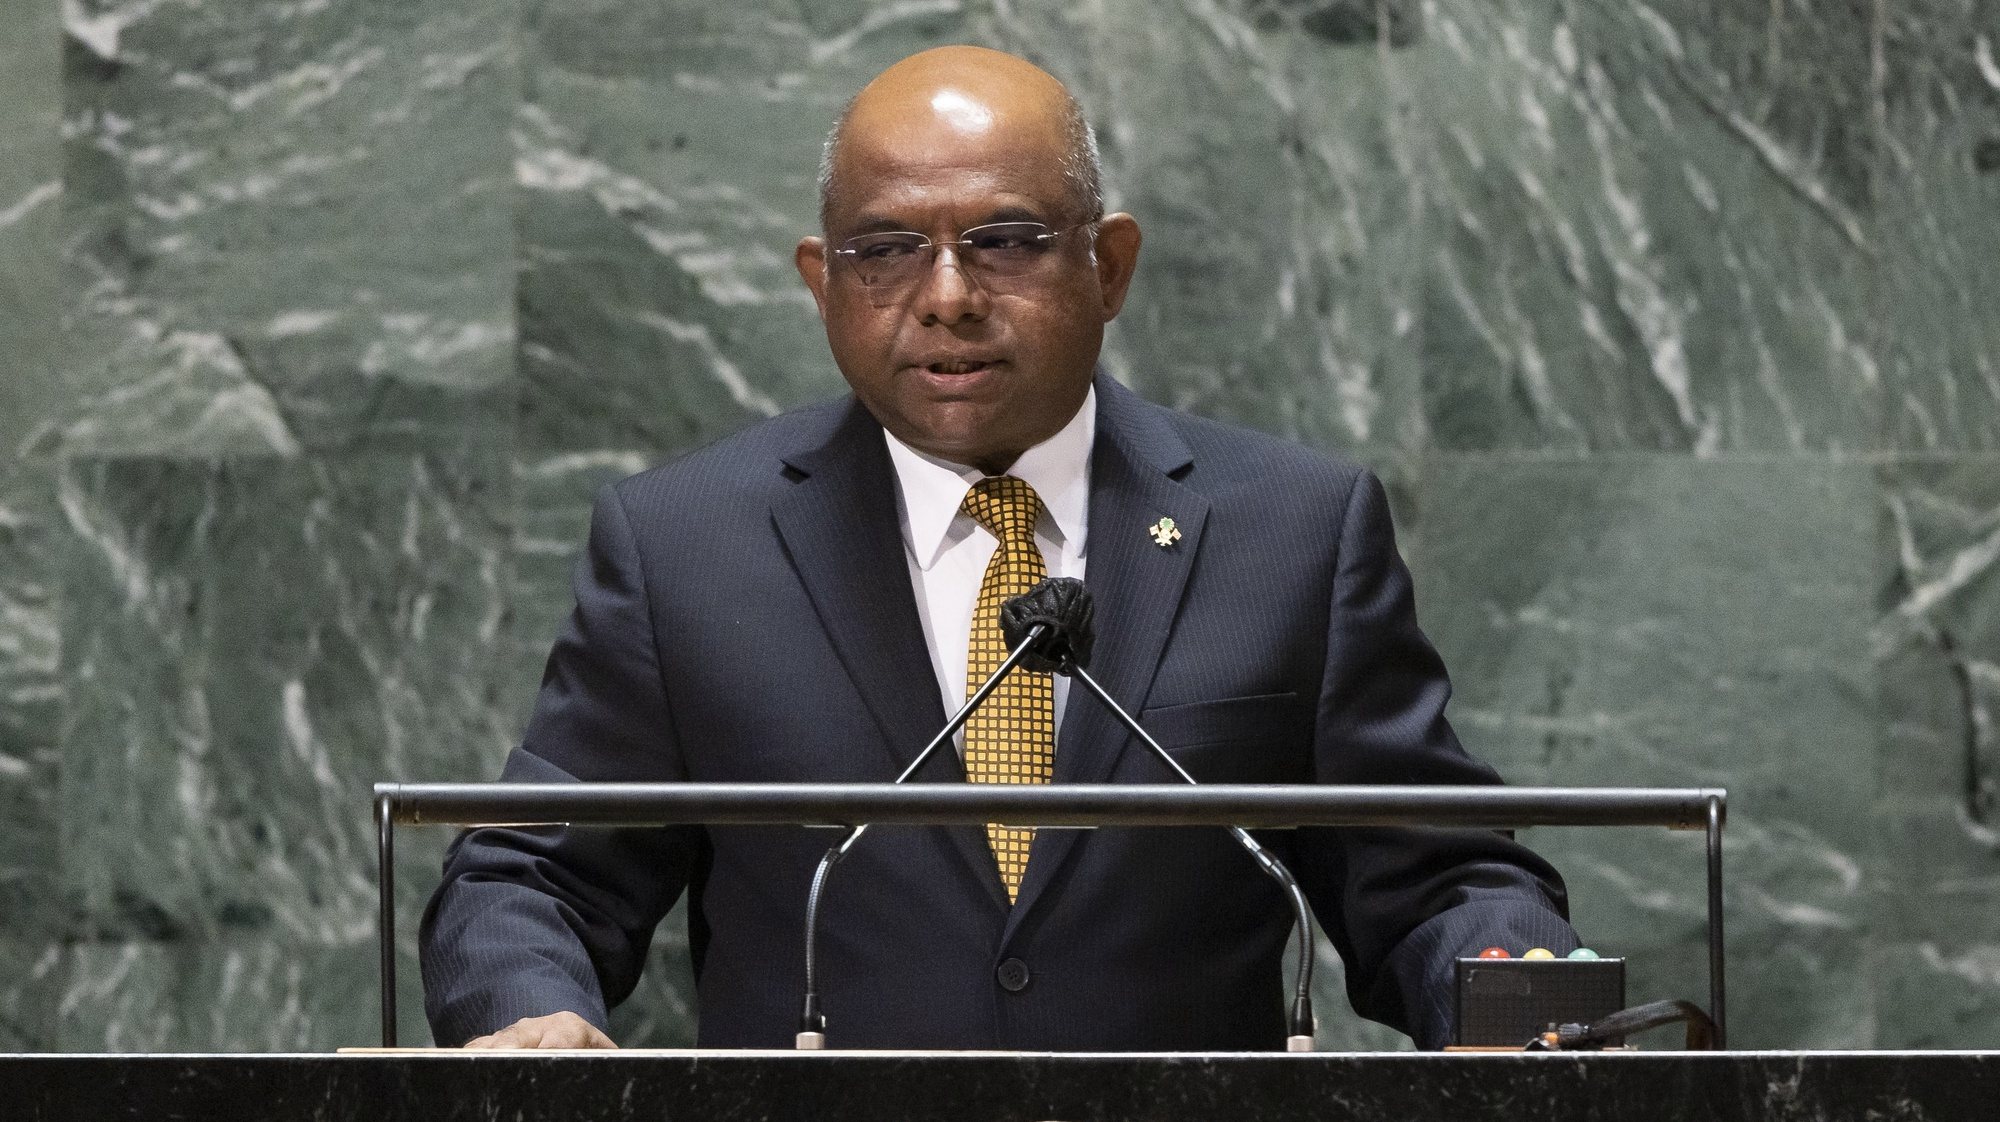 epa09481461 Abdulla Shahid, President of the United Nations General Assembly during the 76th session, speaks during a high-level meeting to commemorate the twentieth anniversary of the adoption of the Durban Declaration being held during the General Debate of the 76th Session of the United Nations General Assembly in New York, New York, USA, 22 September 2021.  EPA/JUSTIN LANE